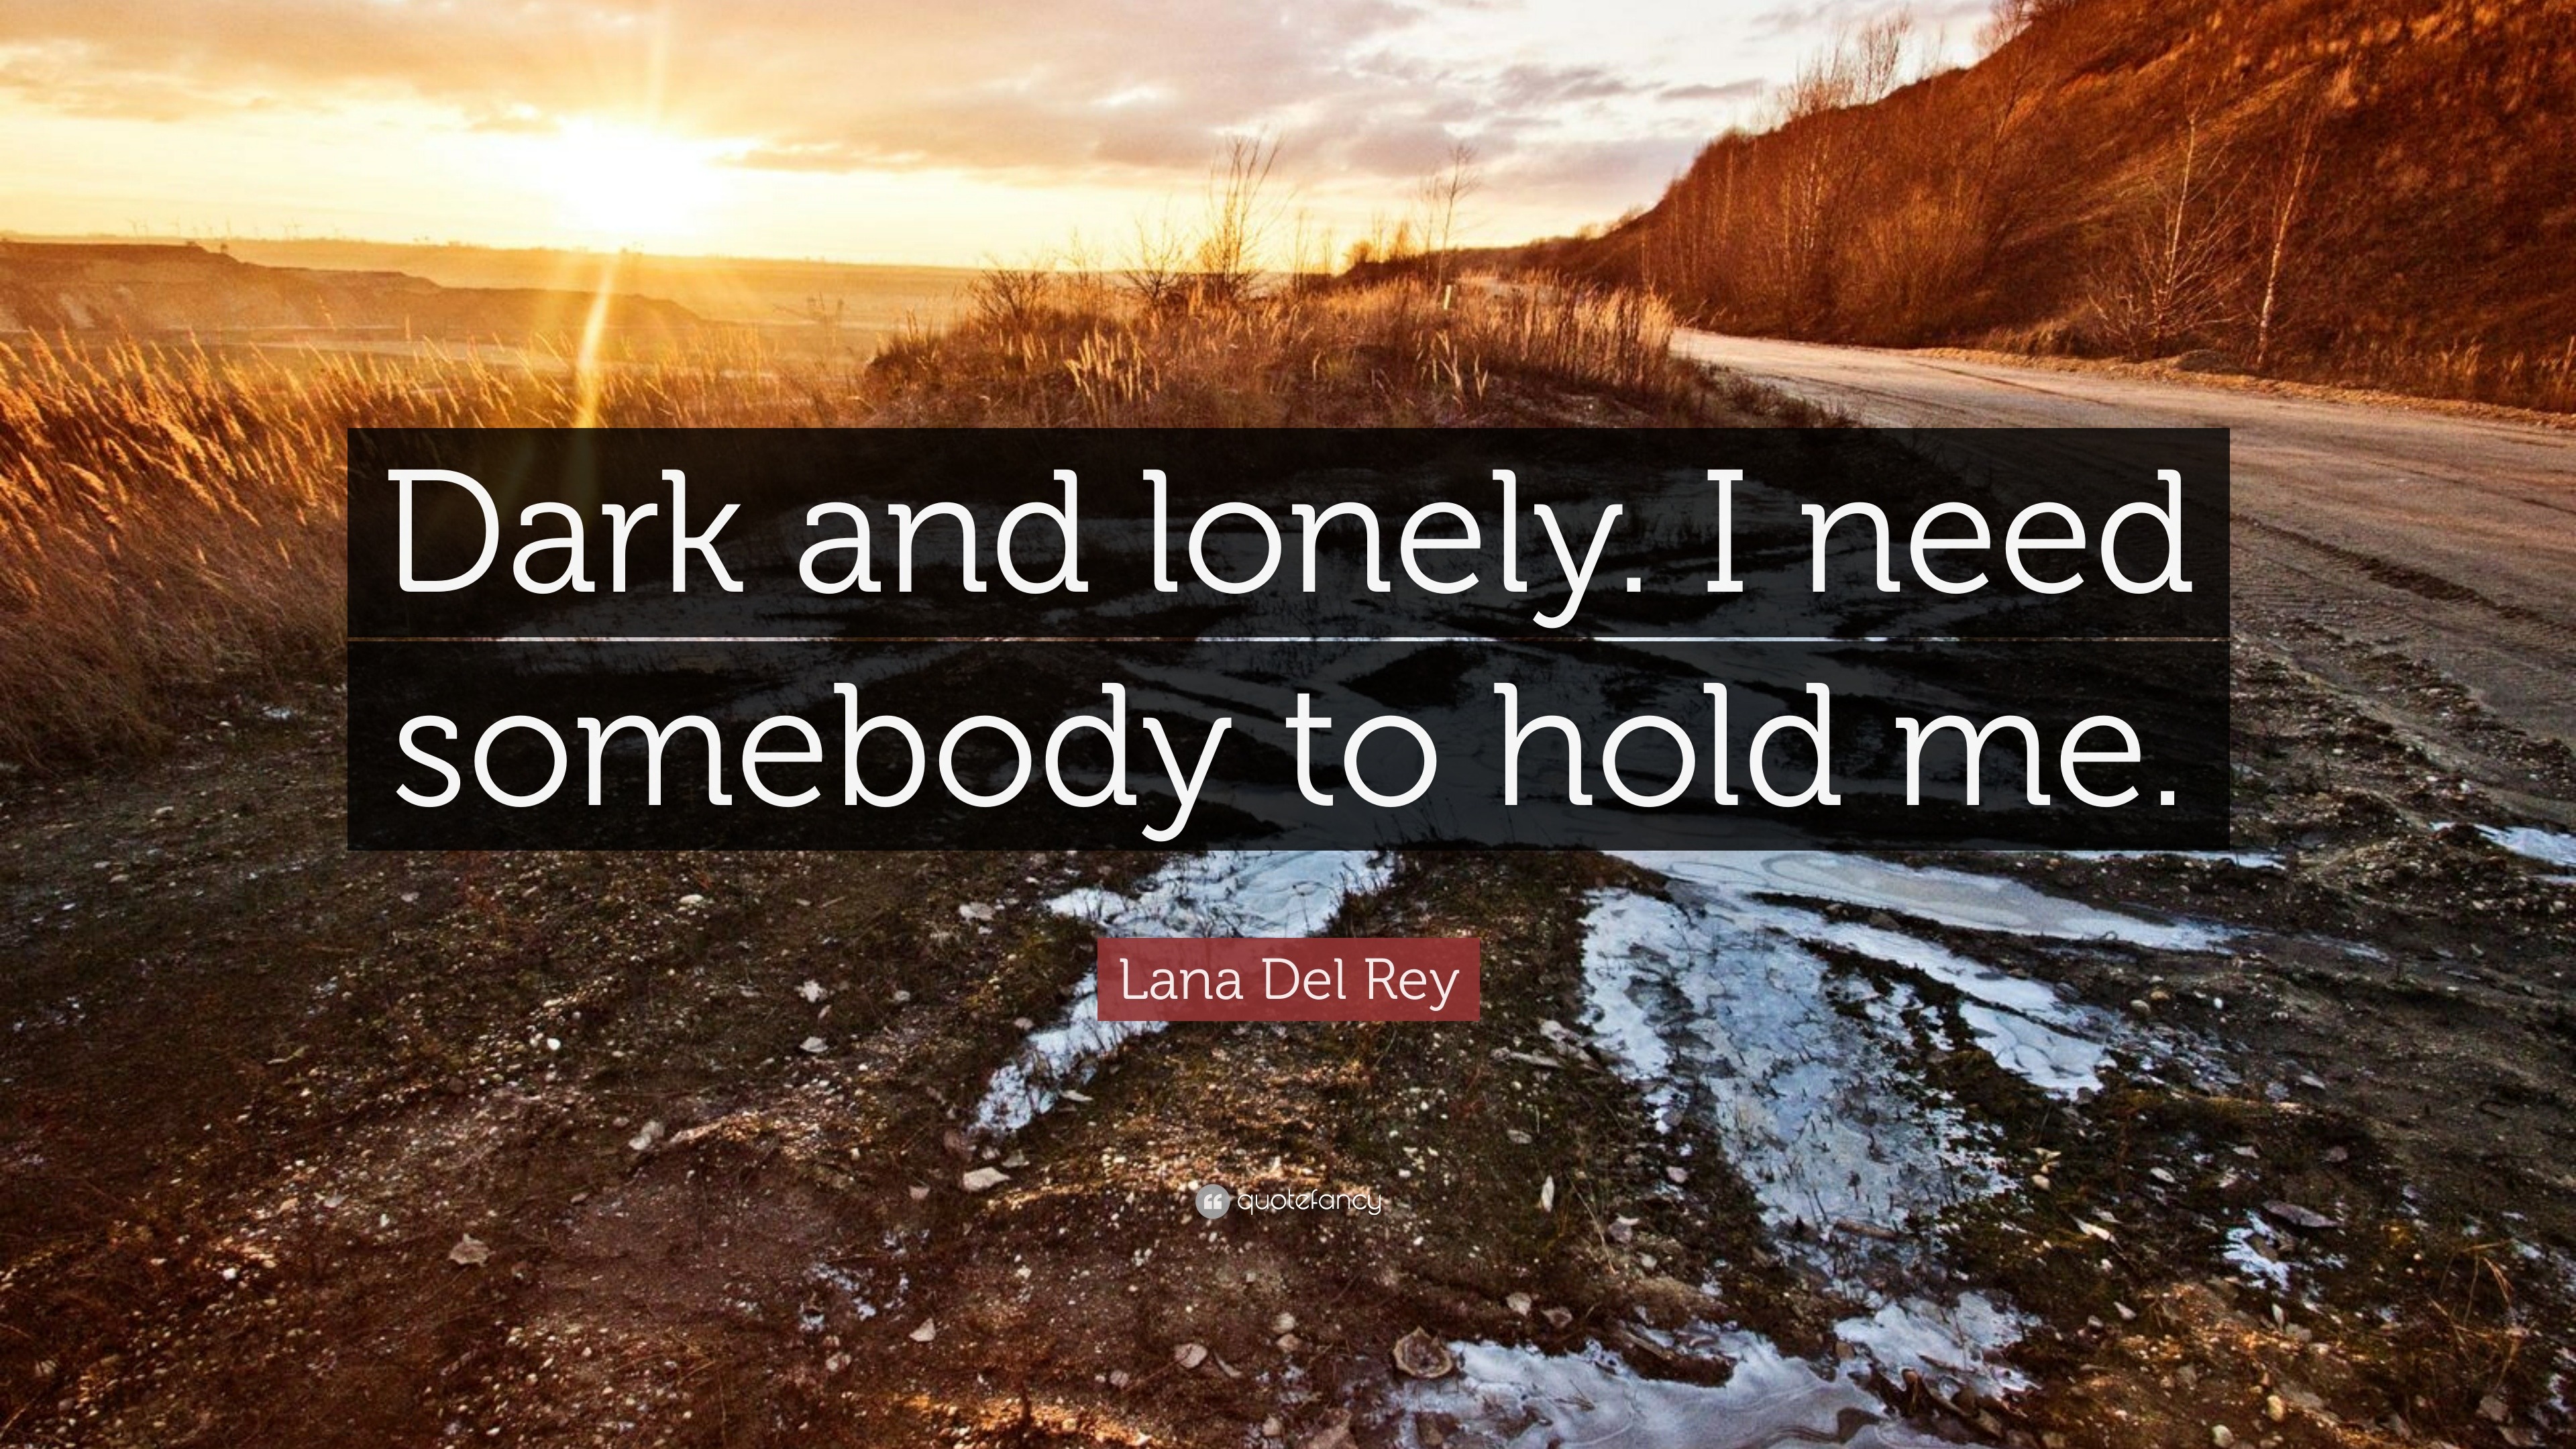 Lana Del Rey Quote: “Dark and lonely. I need somebody to hold me.”